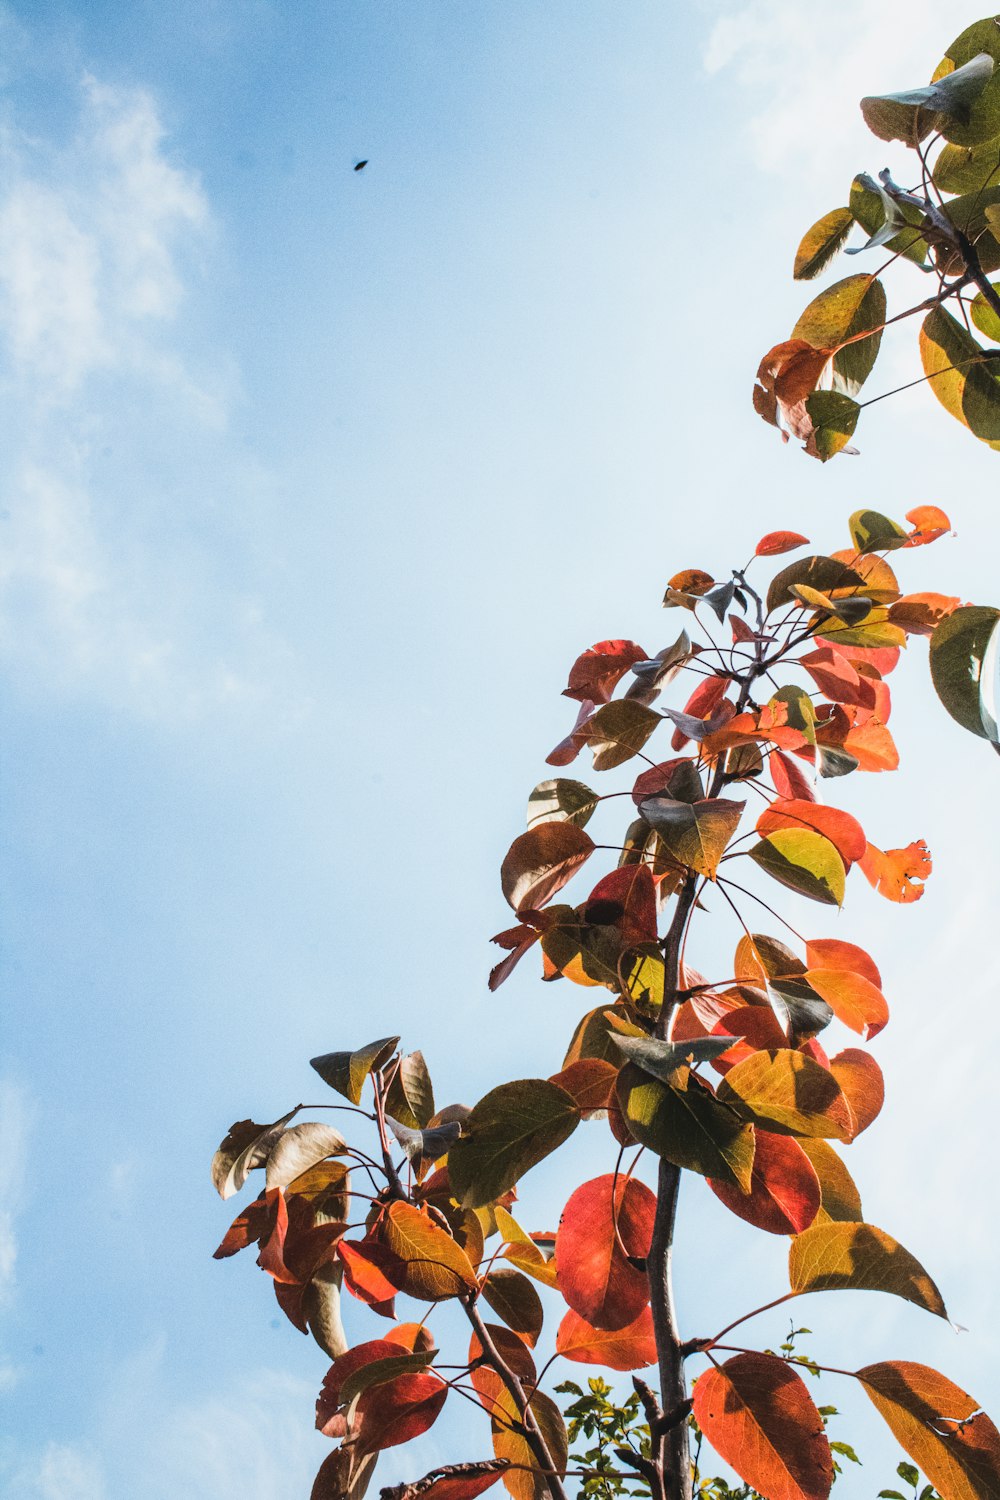 red and yellow leaves on tree branch under white clouds and blue sky during daytime